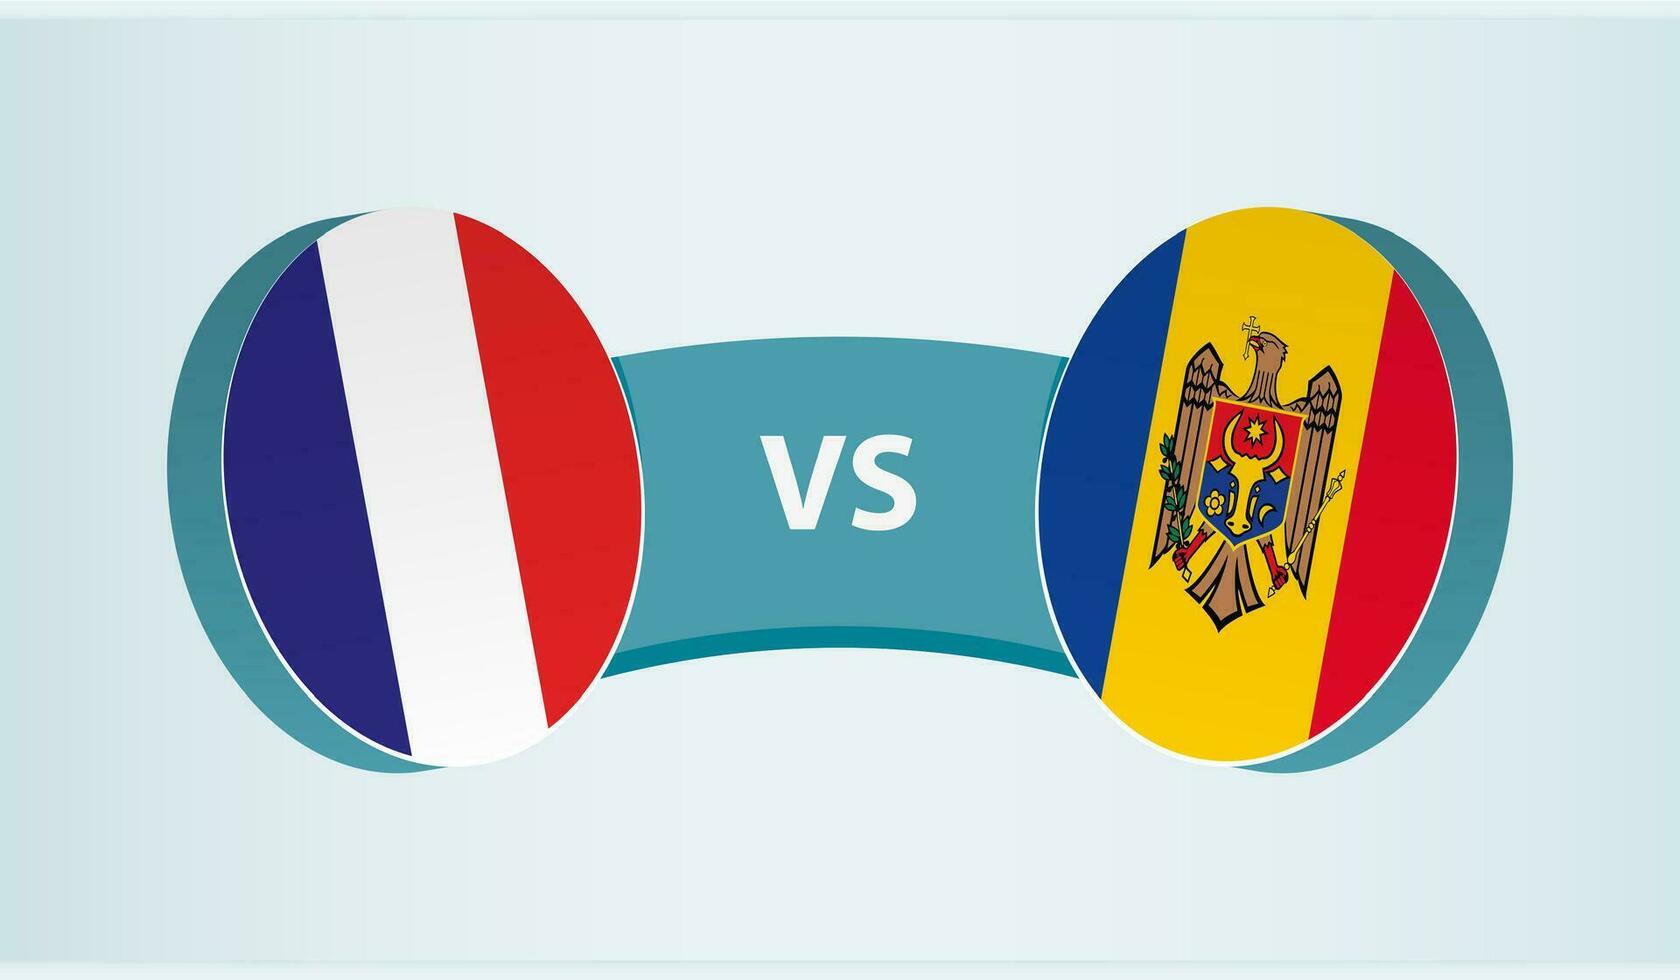 France versus Moldova, team sports competition concept. vector